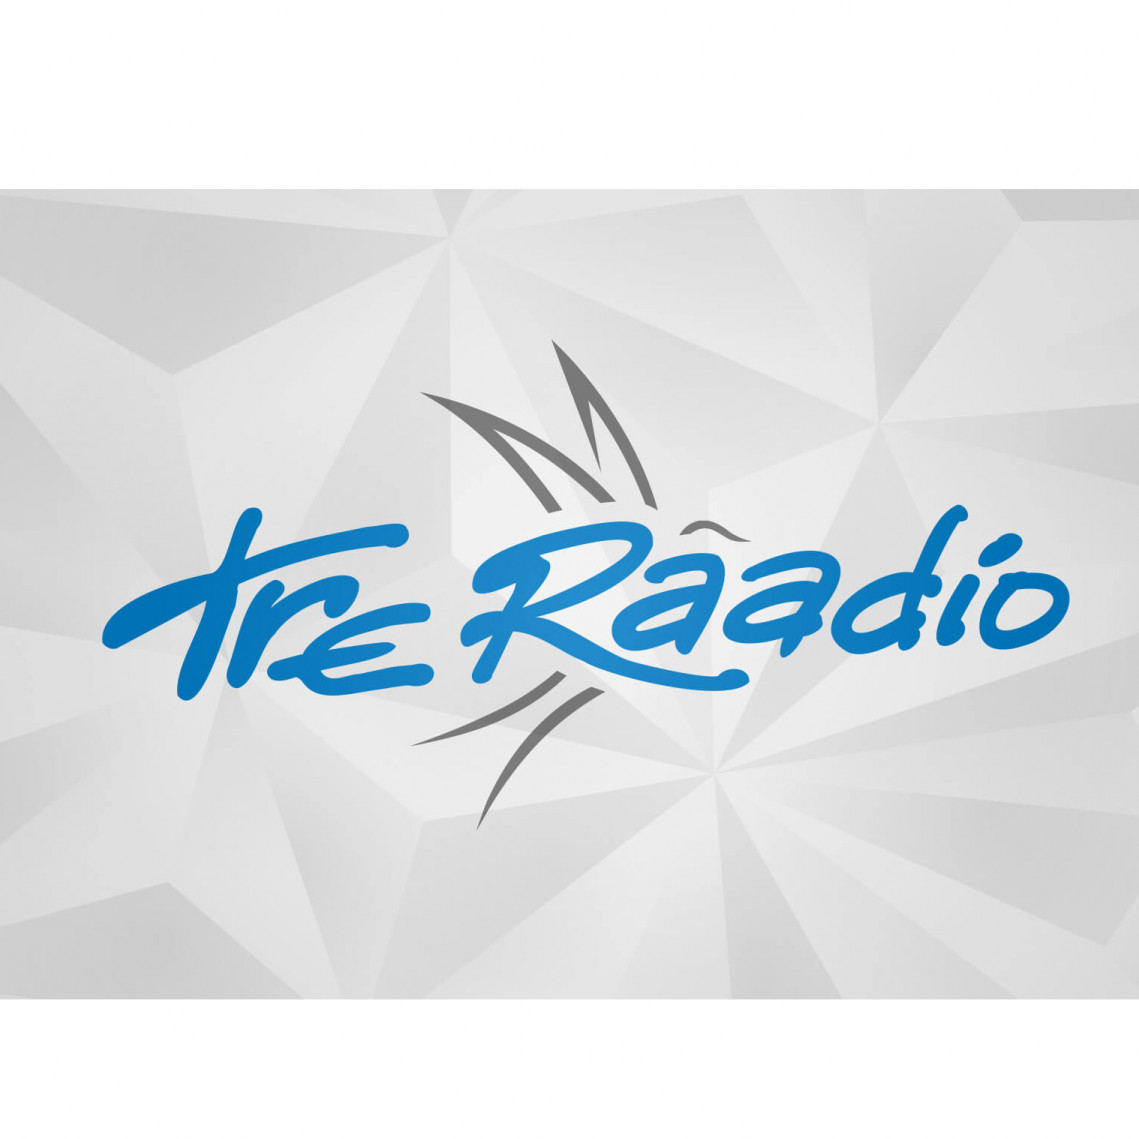 TRE RAADIO ÜHING MTÜ - Other professional, scientific and technical activities n.e.c. in Rapla